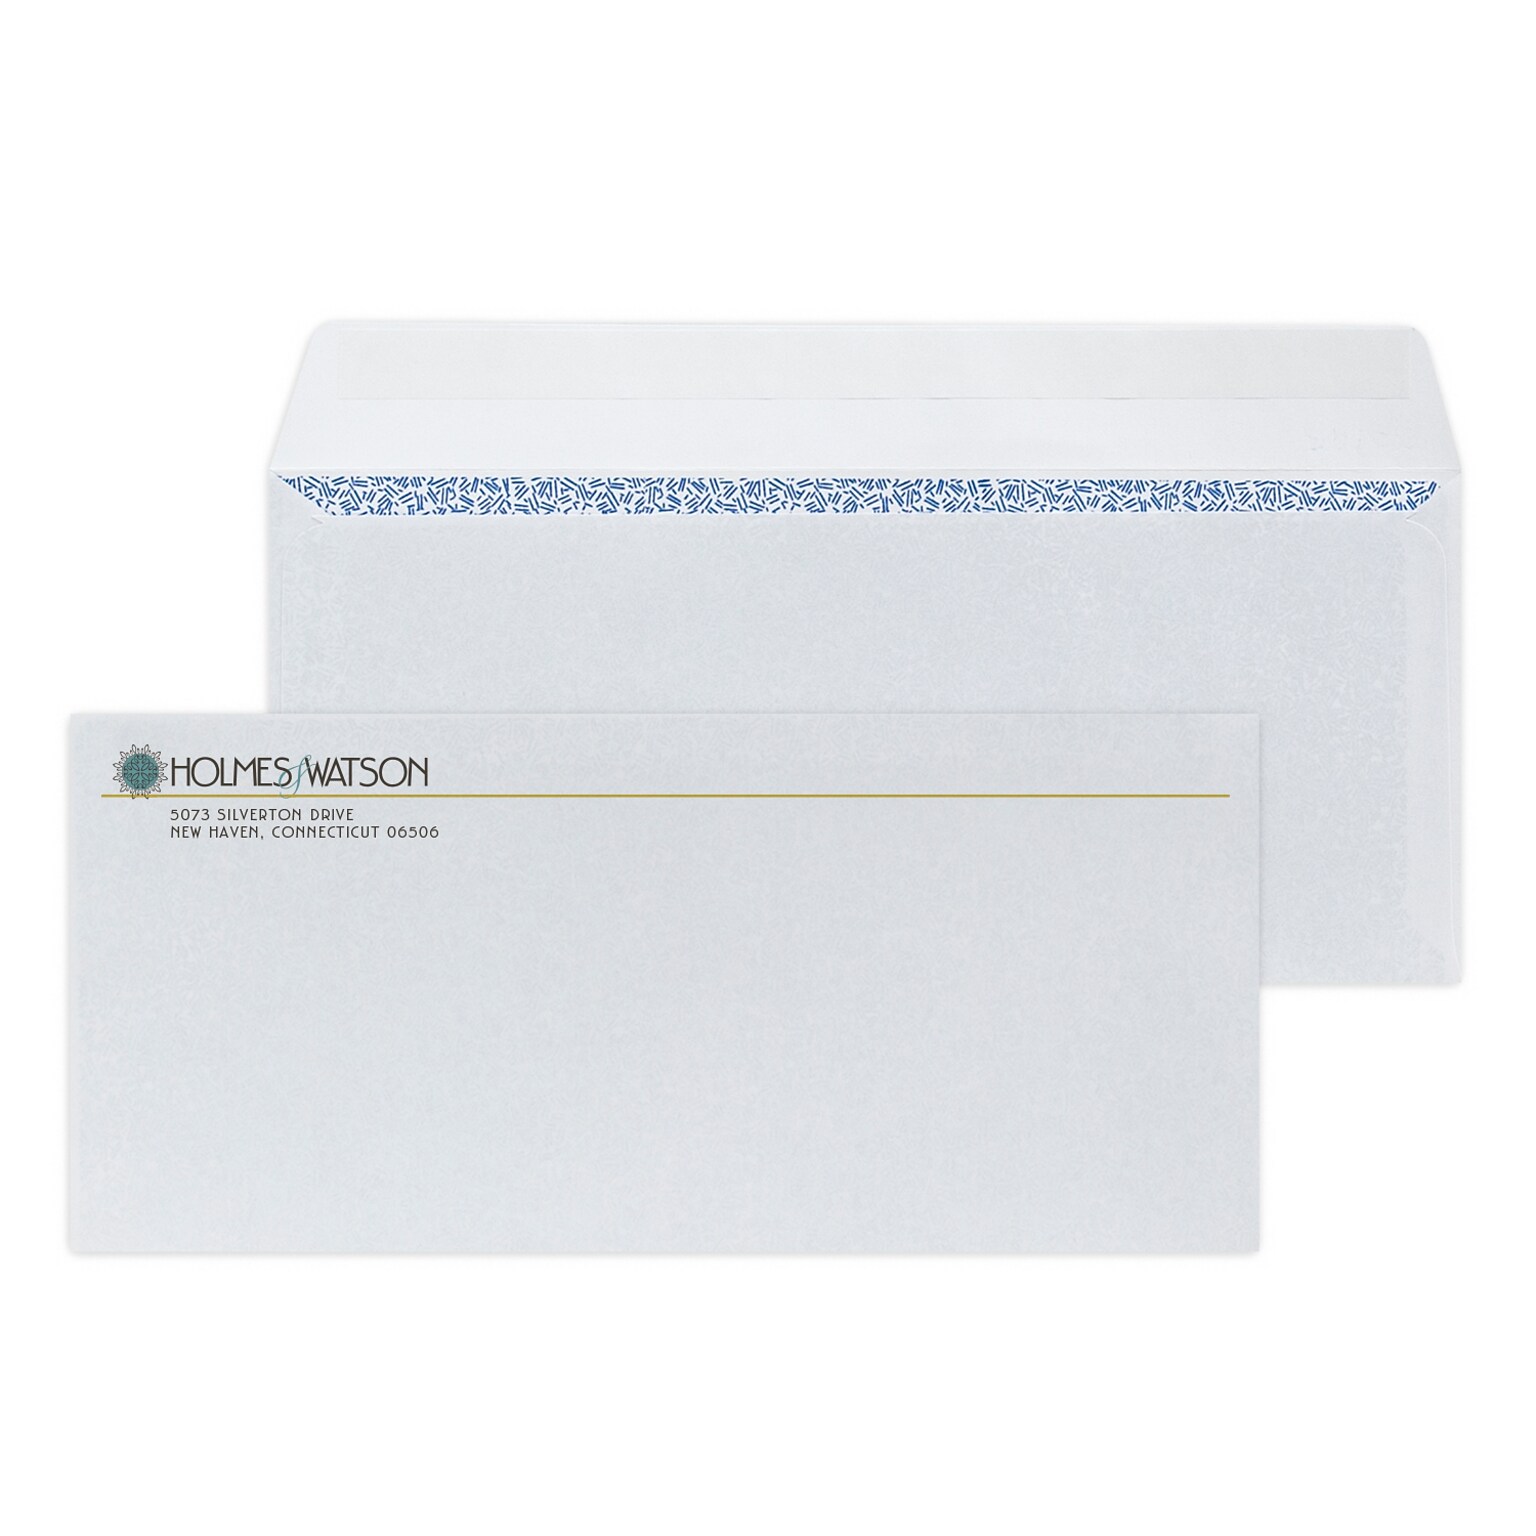 Custom Full Color #10 Peel and Seal Envelopes with Security Tint, 4 1/4 x 9 1/2, 24# White Wove, 250 / Pack